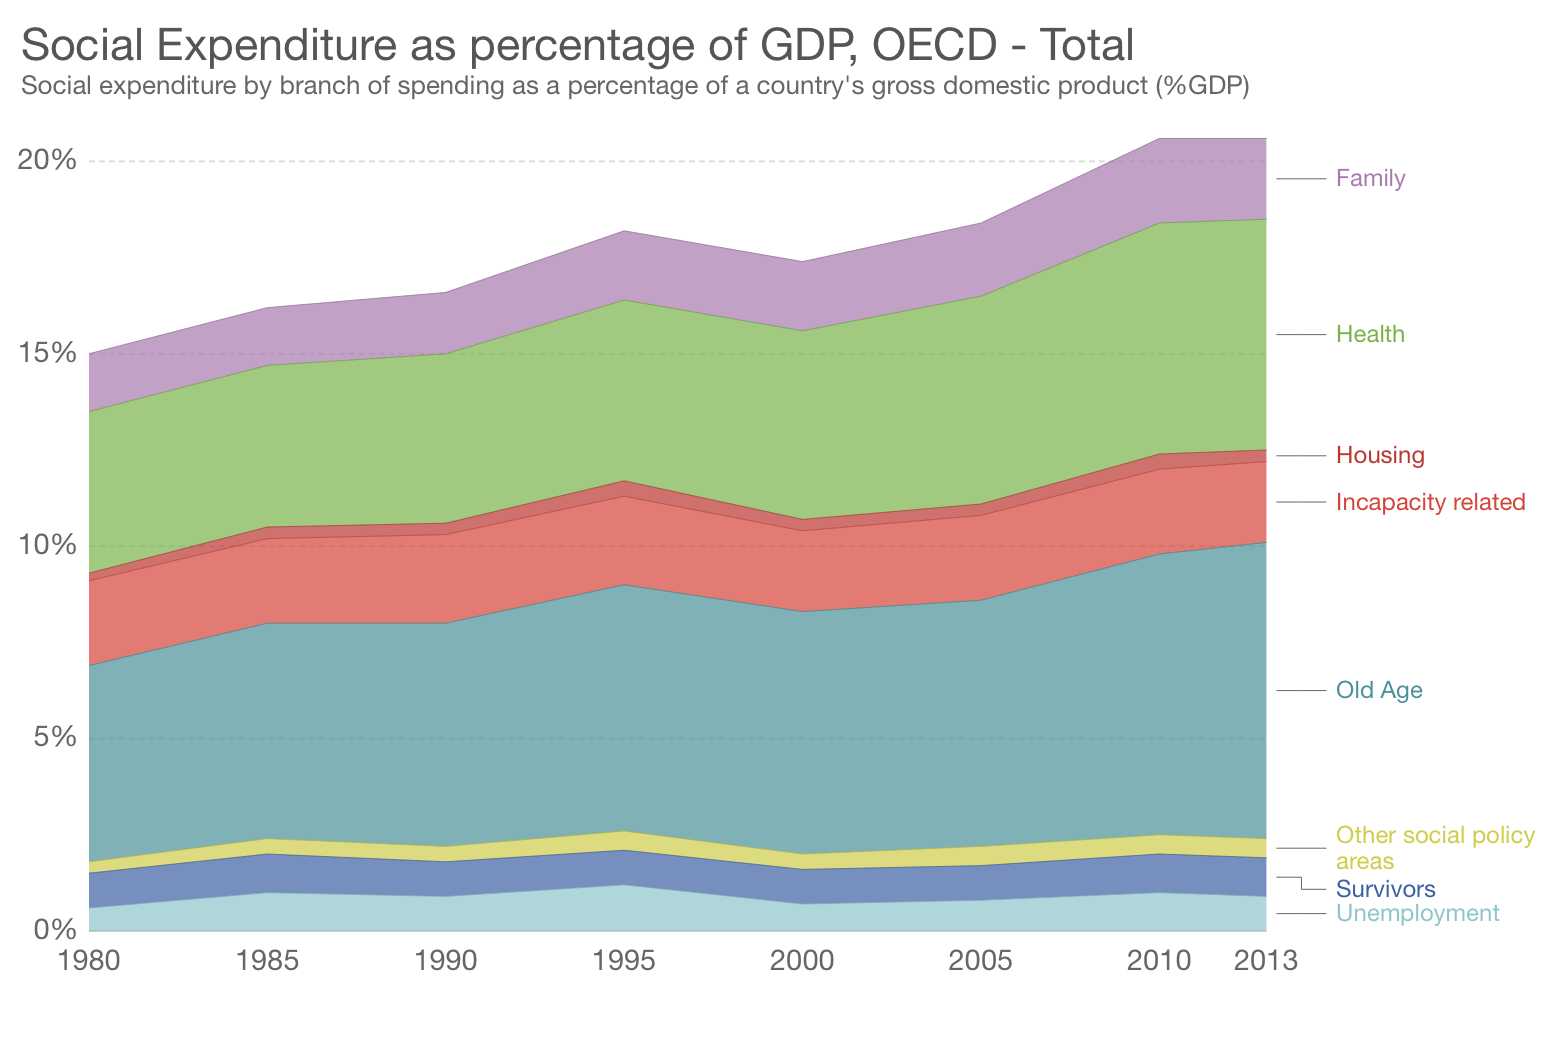 Social Spending By Category, OECD (Fiscal Policy)